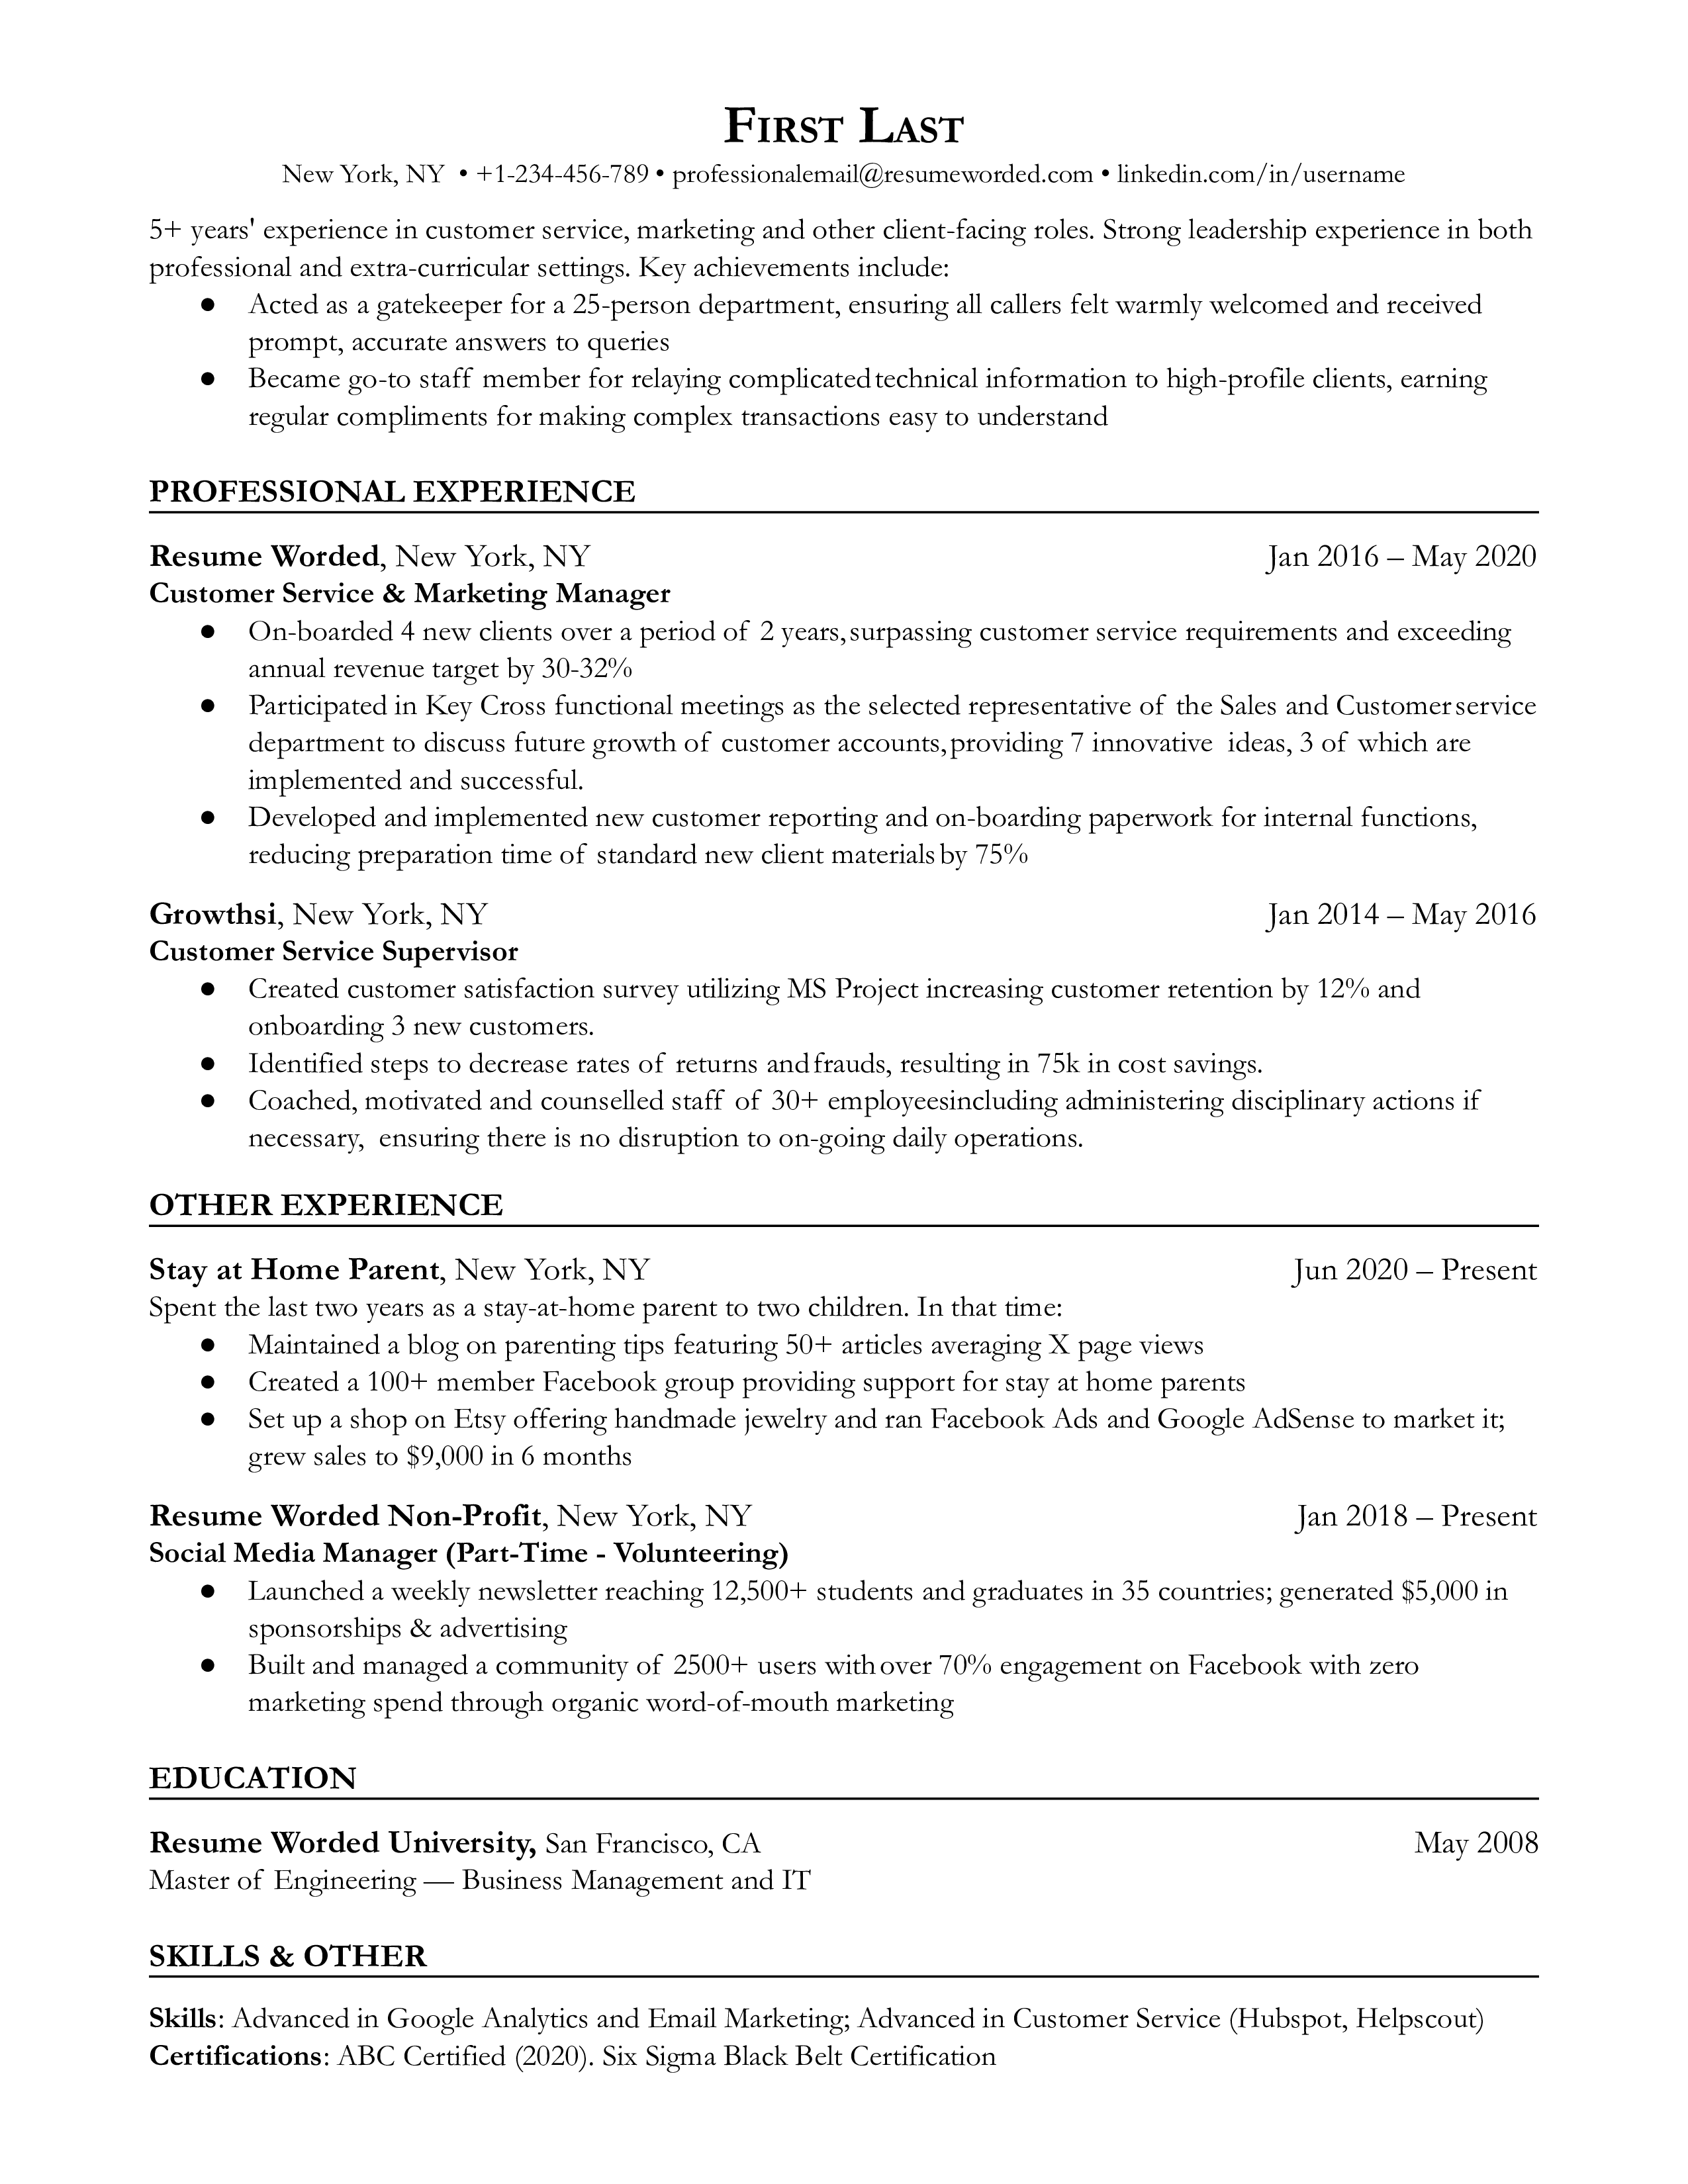 A sample resume template and sample for stay at home moms returning to the workforce in Google Docs, Word or PDF format